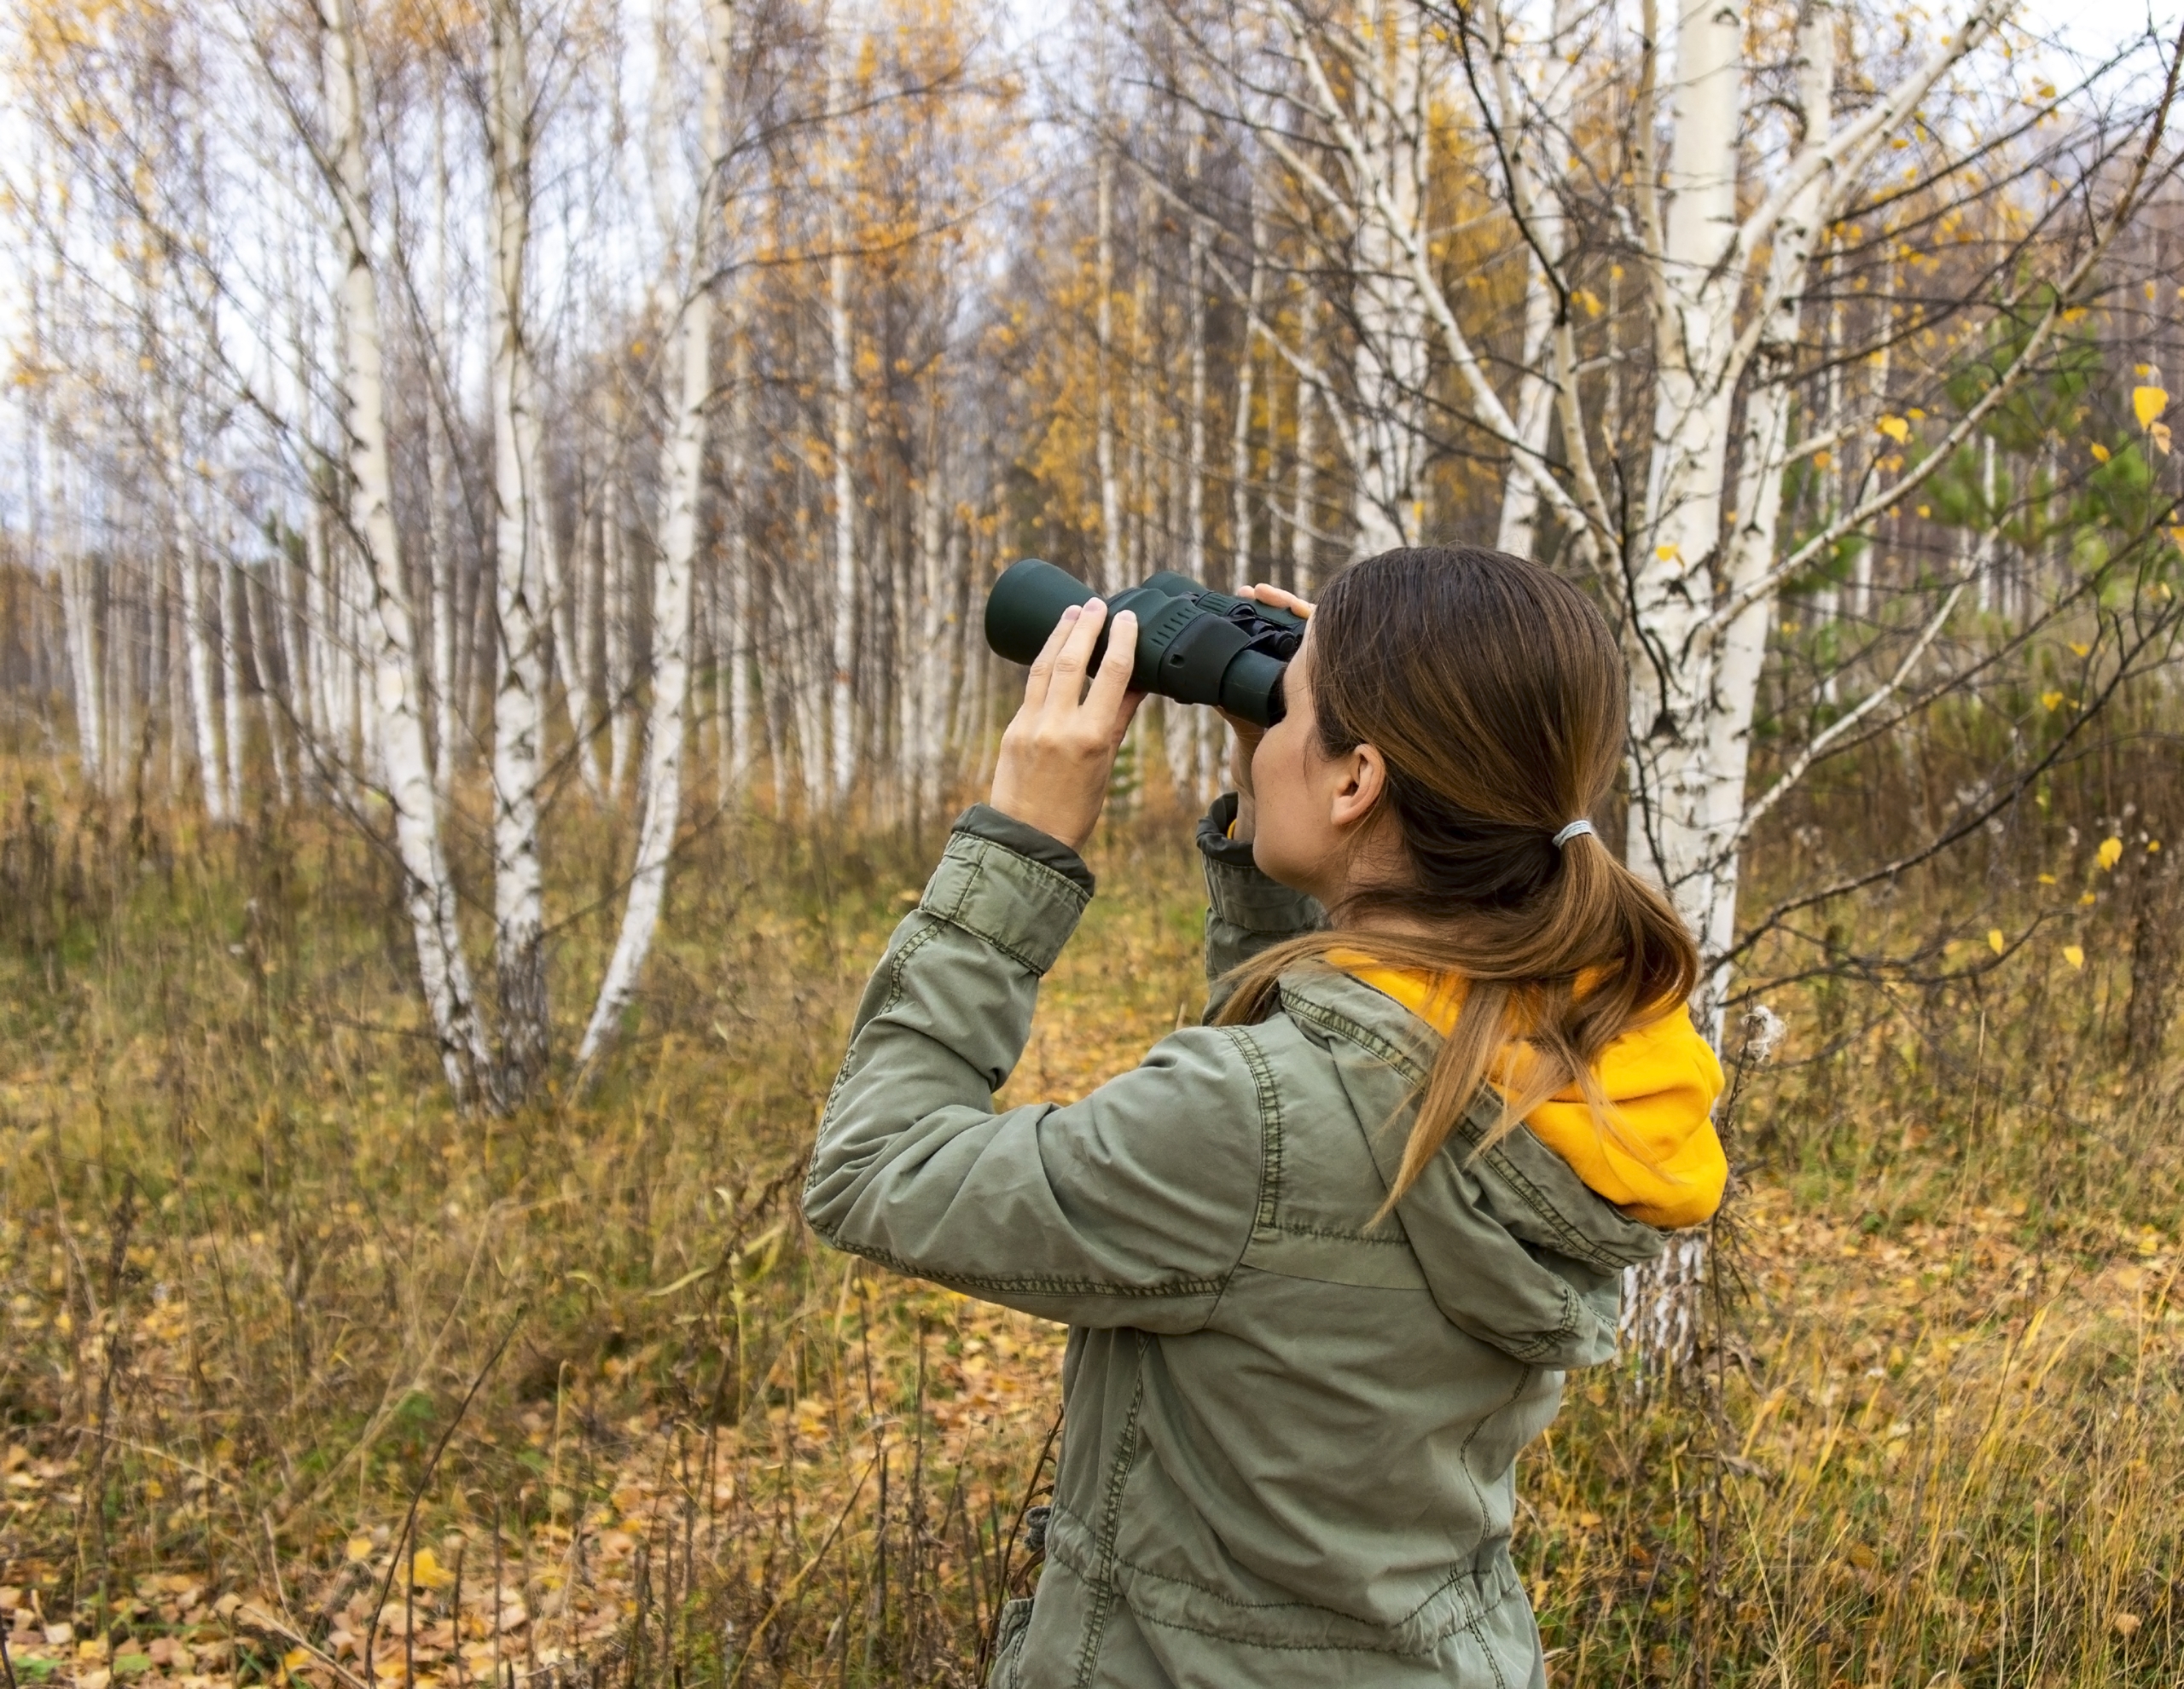 Young woman with binoculars watching birds in the autumn forest Scientific research - Songbird RV Park 4